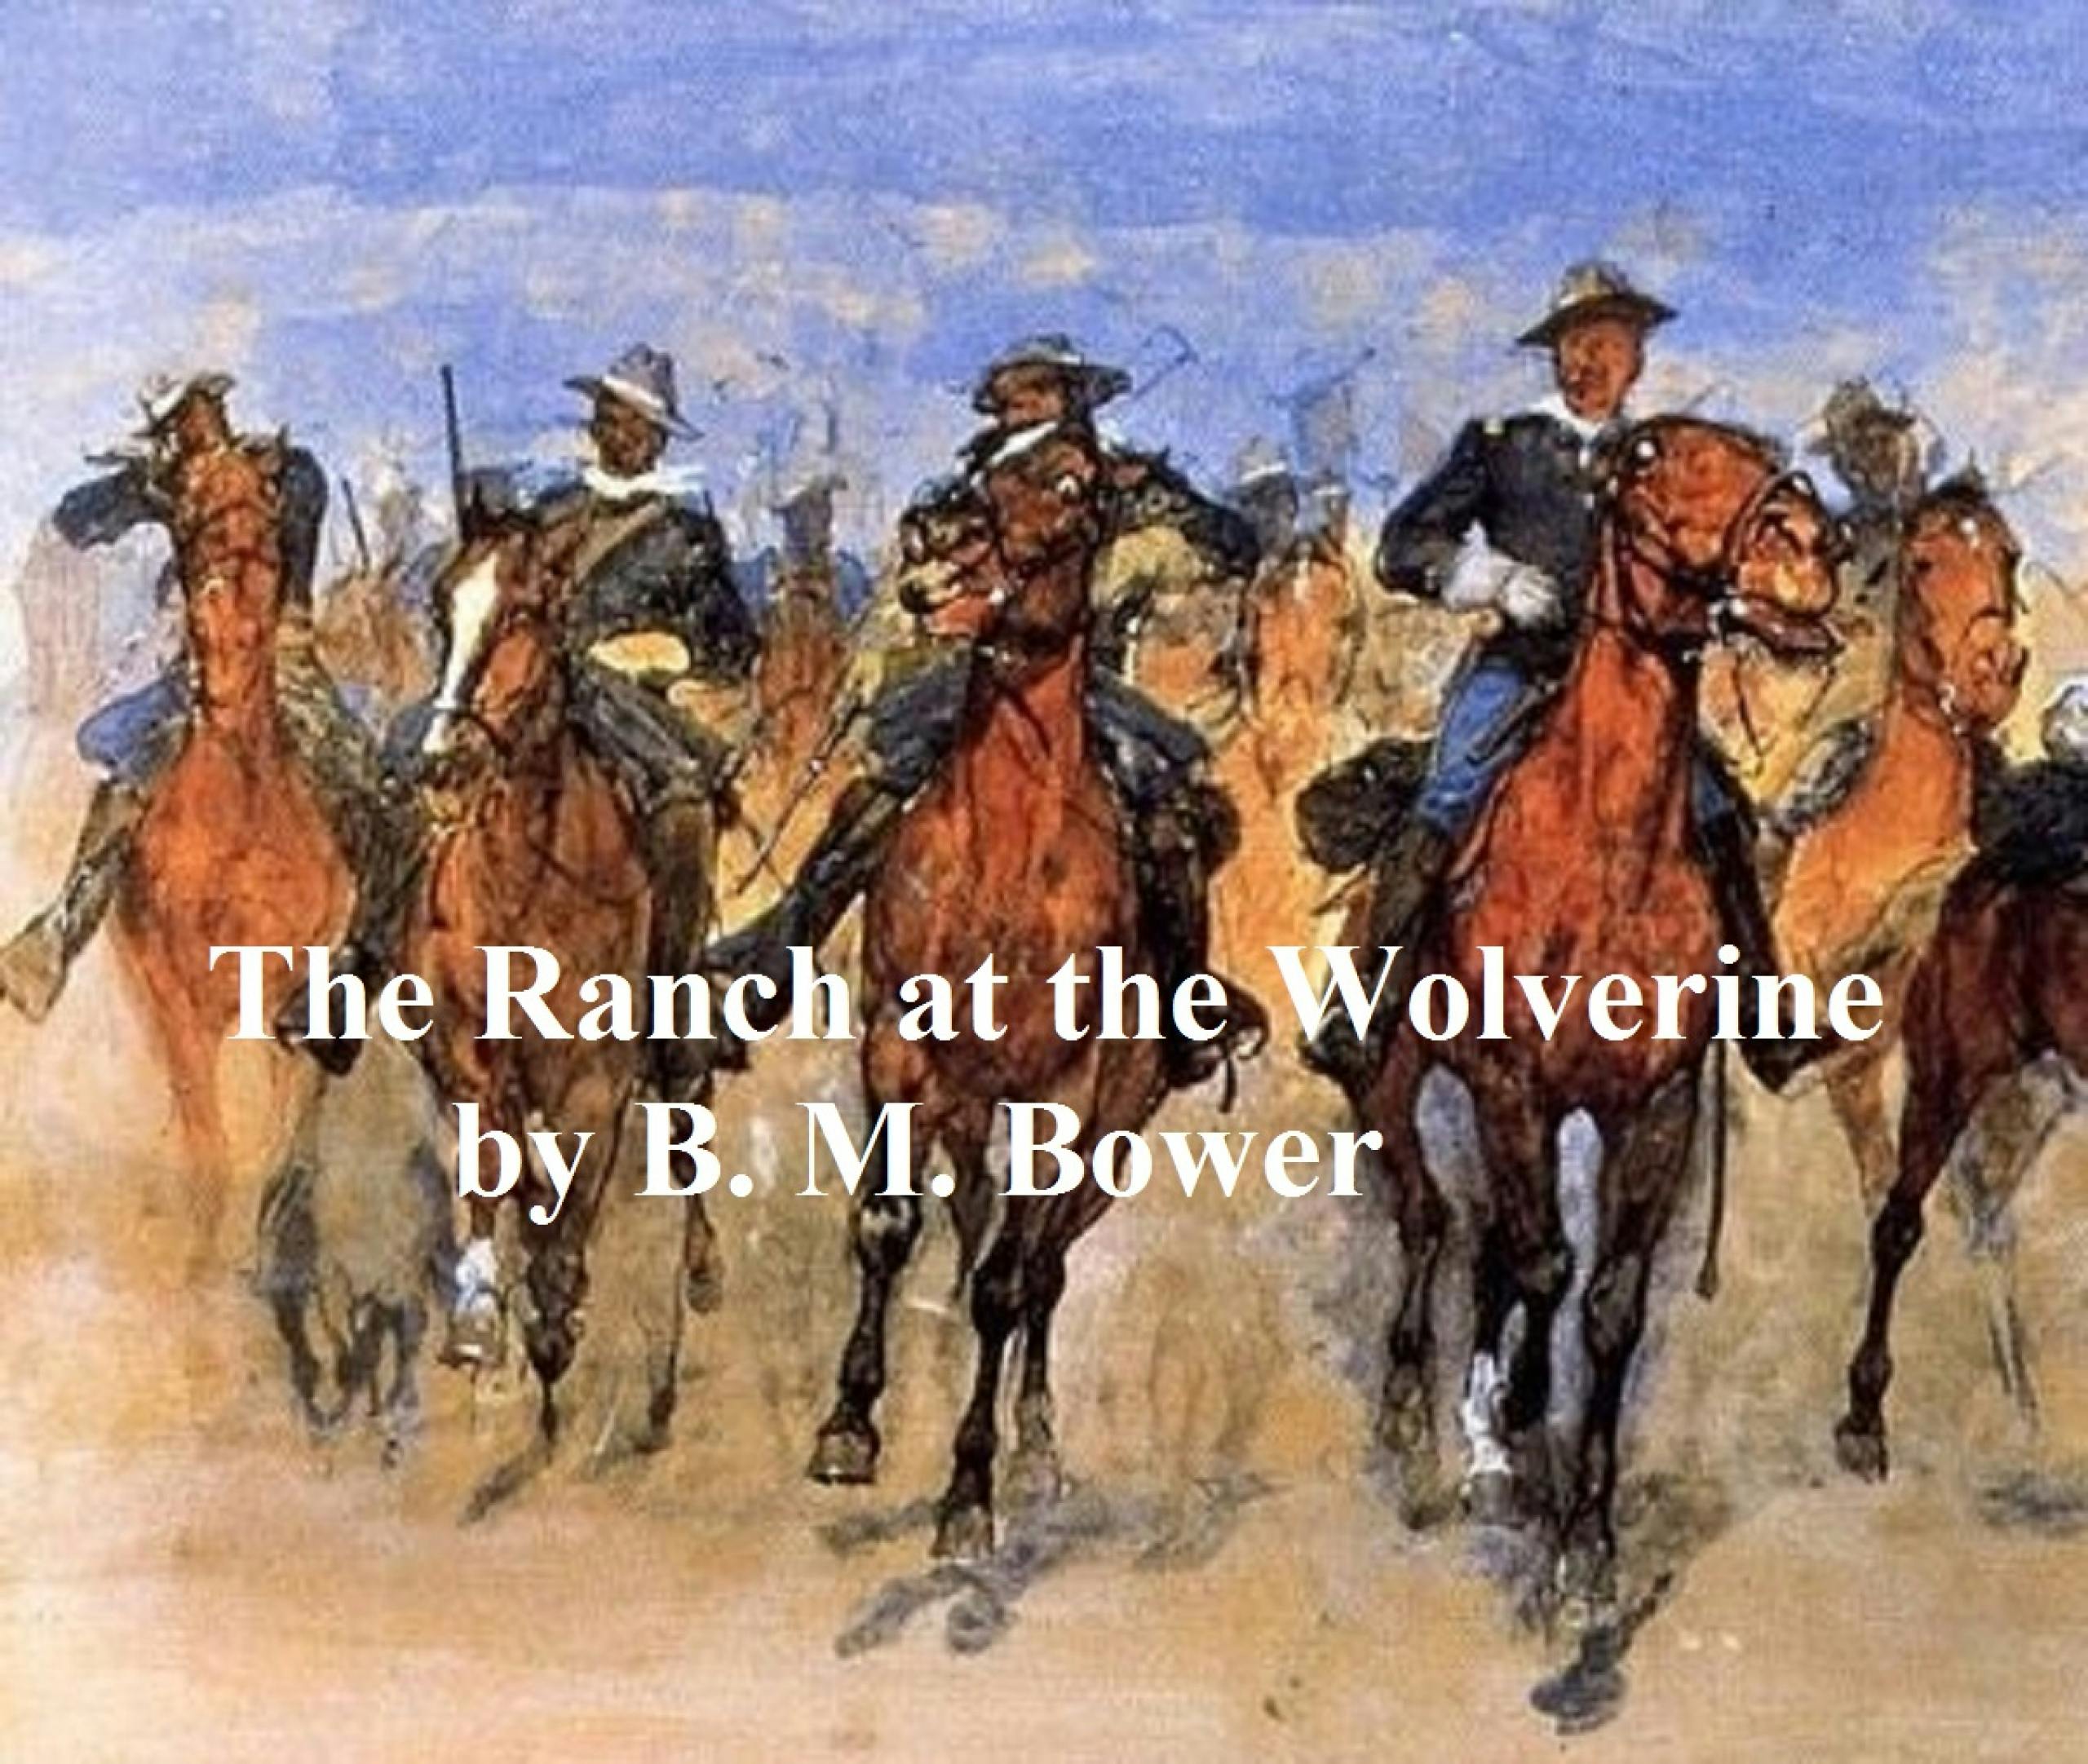 The Ranch at the Wolverine - B. M. Bower